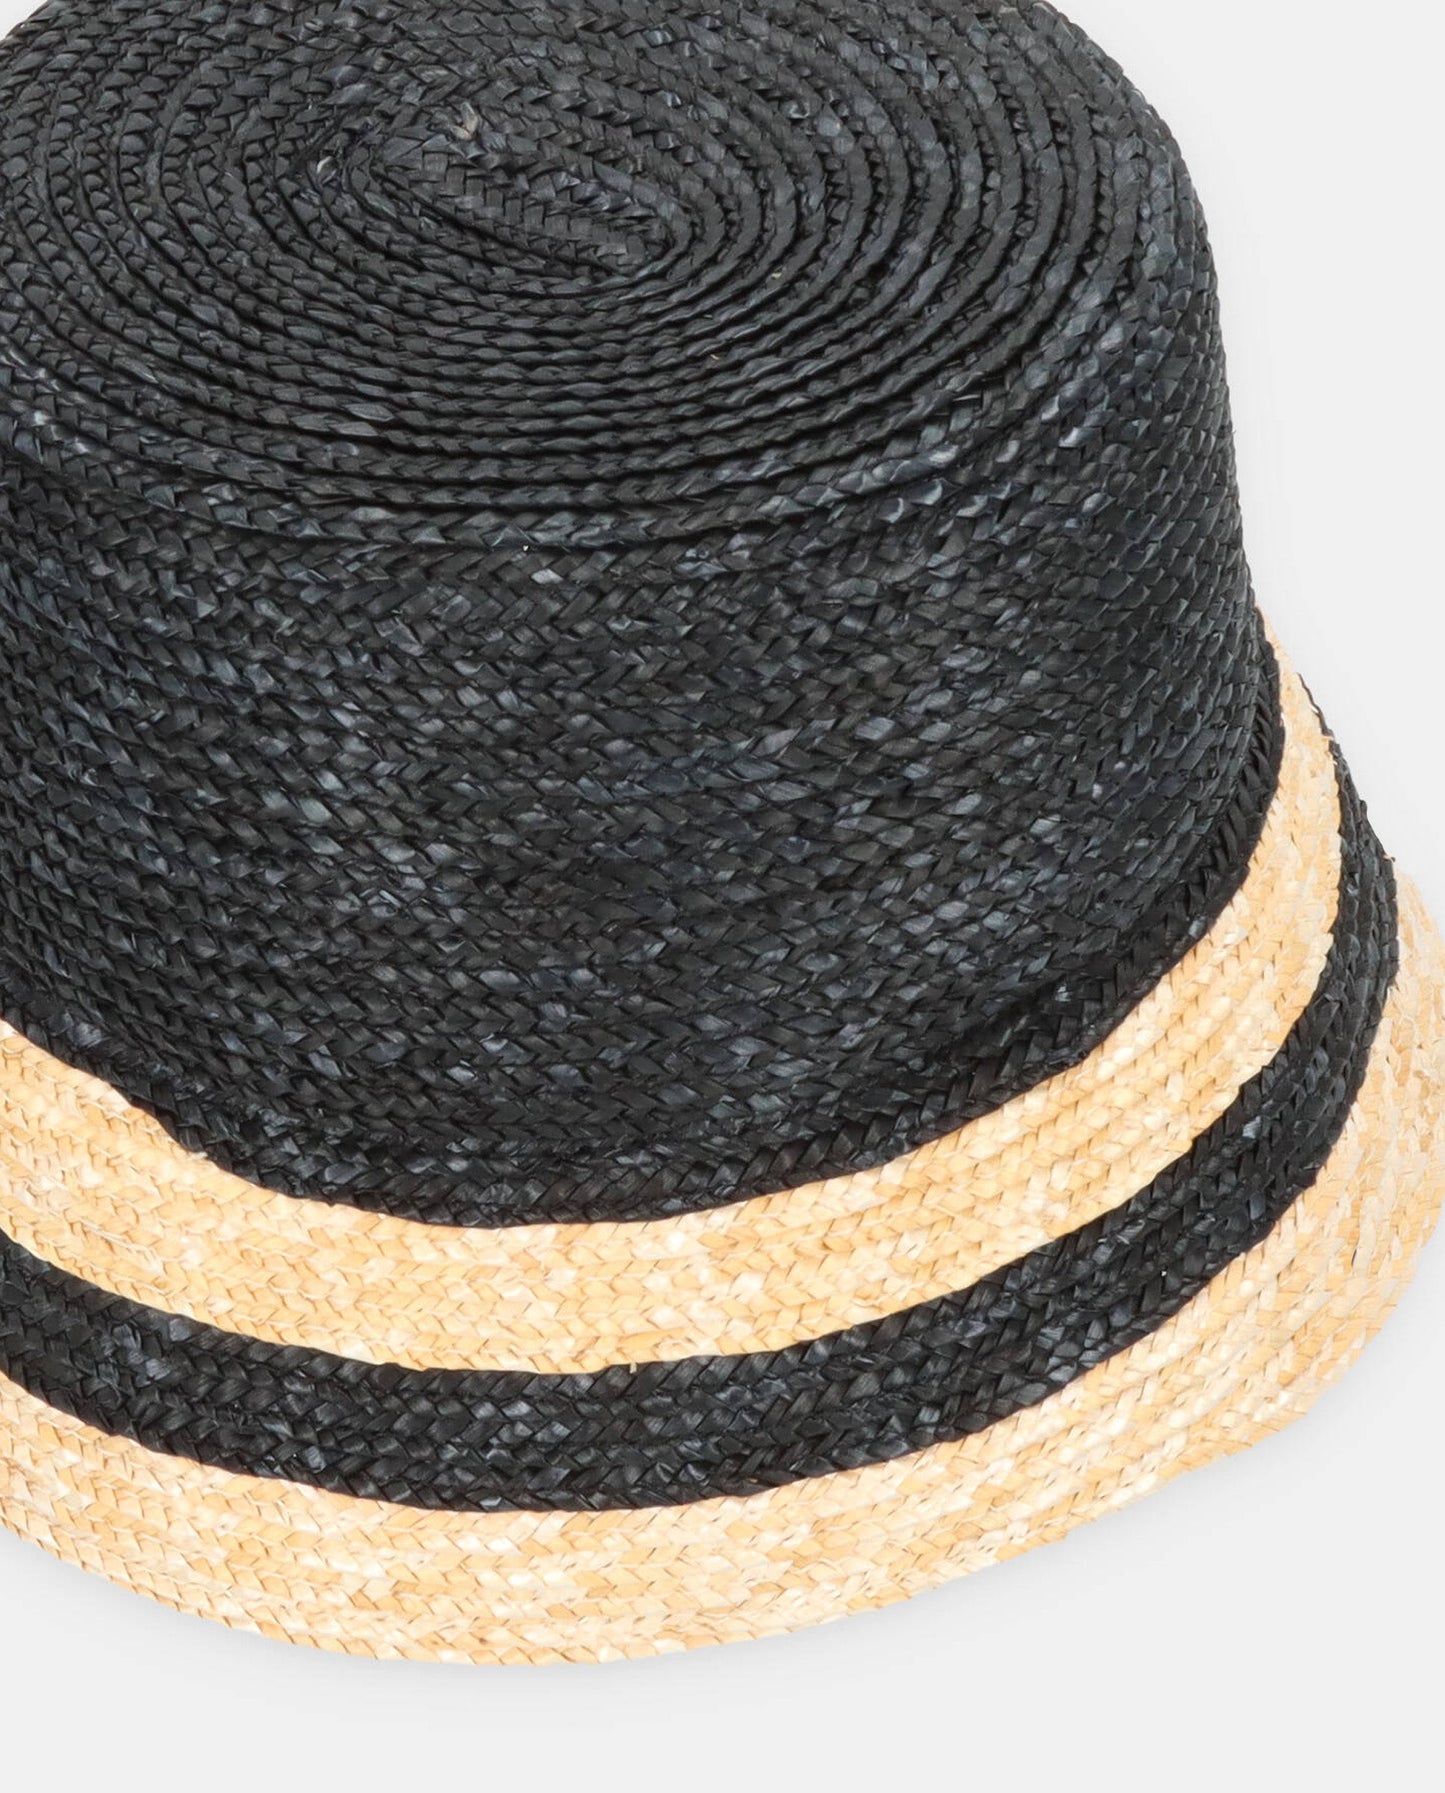 Two-tone natural black bucket